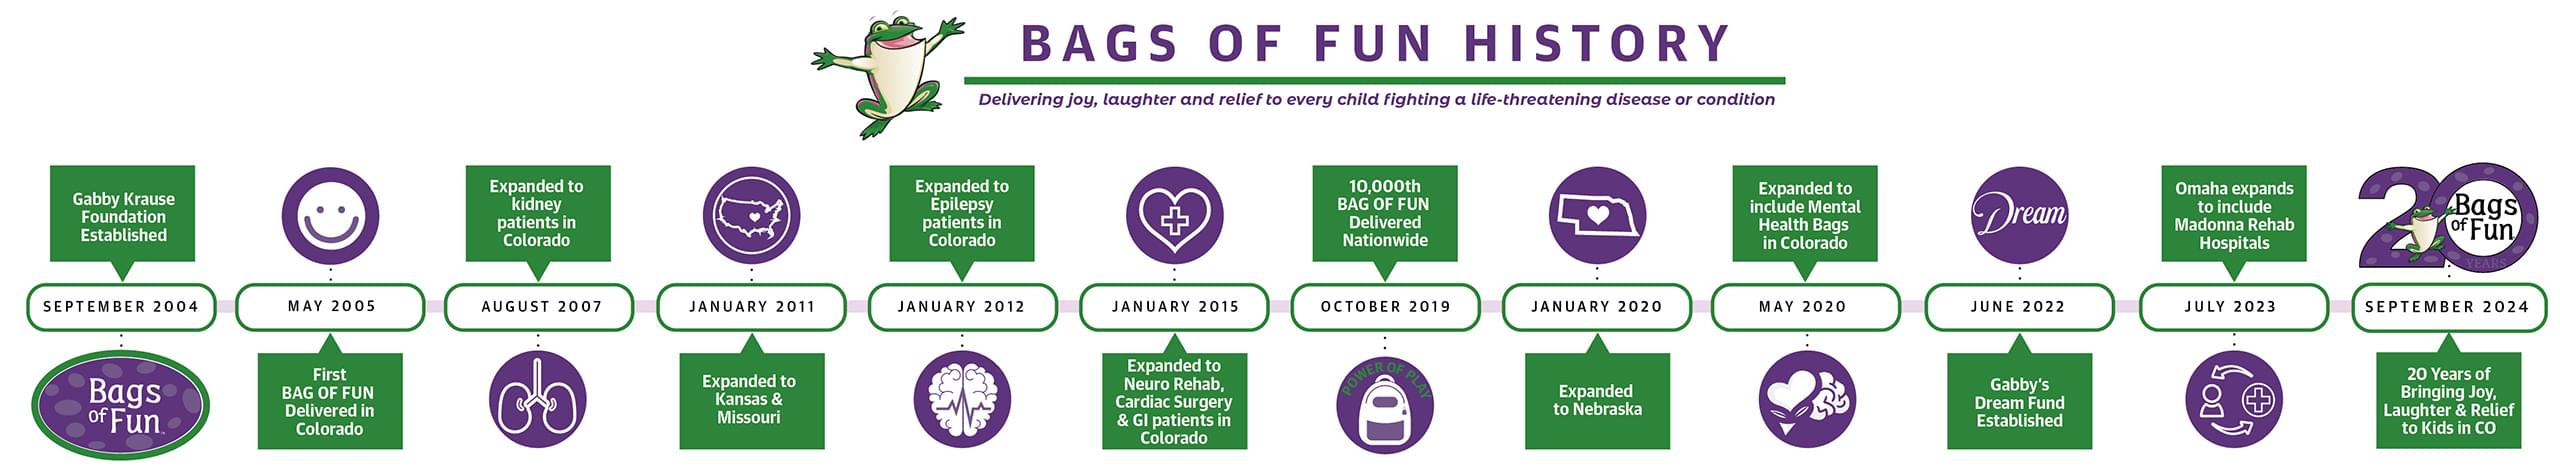 BAGS OF FUN HISTORY - Delivering joy, laughter and relief to every child fighting a life-threatening disease or condition. SEPTEMBER 2004: Gabby Krause Foundation Established. MAY 2005: First BAG OF FUN Delivered in Colorado. AUGUST 2007: Expanded to kidney patients in Colorado. JANUARY 2011: Expanded to Kansas & Missouri. JANUARY 2012: Expanded to Epilepsy patients in Colorado. JANUARY 2015: Expanded to Nuero Rehab, Cardiac Surgery & GI patients in Colorado. OCTOBER 2019: 10,000th BAG OF FUN Delivered Nationwide. JANUARY 2020: Expanded to Nebraska. MAY 2020: Expanded to include Mental Health Bags in Colorado. JUNE 2022 - Gabby's Dream Fund Established. July 2023: Omaha expands to include Madonna Rehab Hospitals. September 2024: 20 years of Bringing Joy Laughter and Relief to kids in Colorado. 20 years of Bags of Fun.